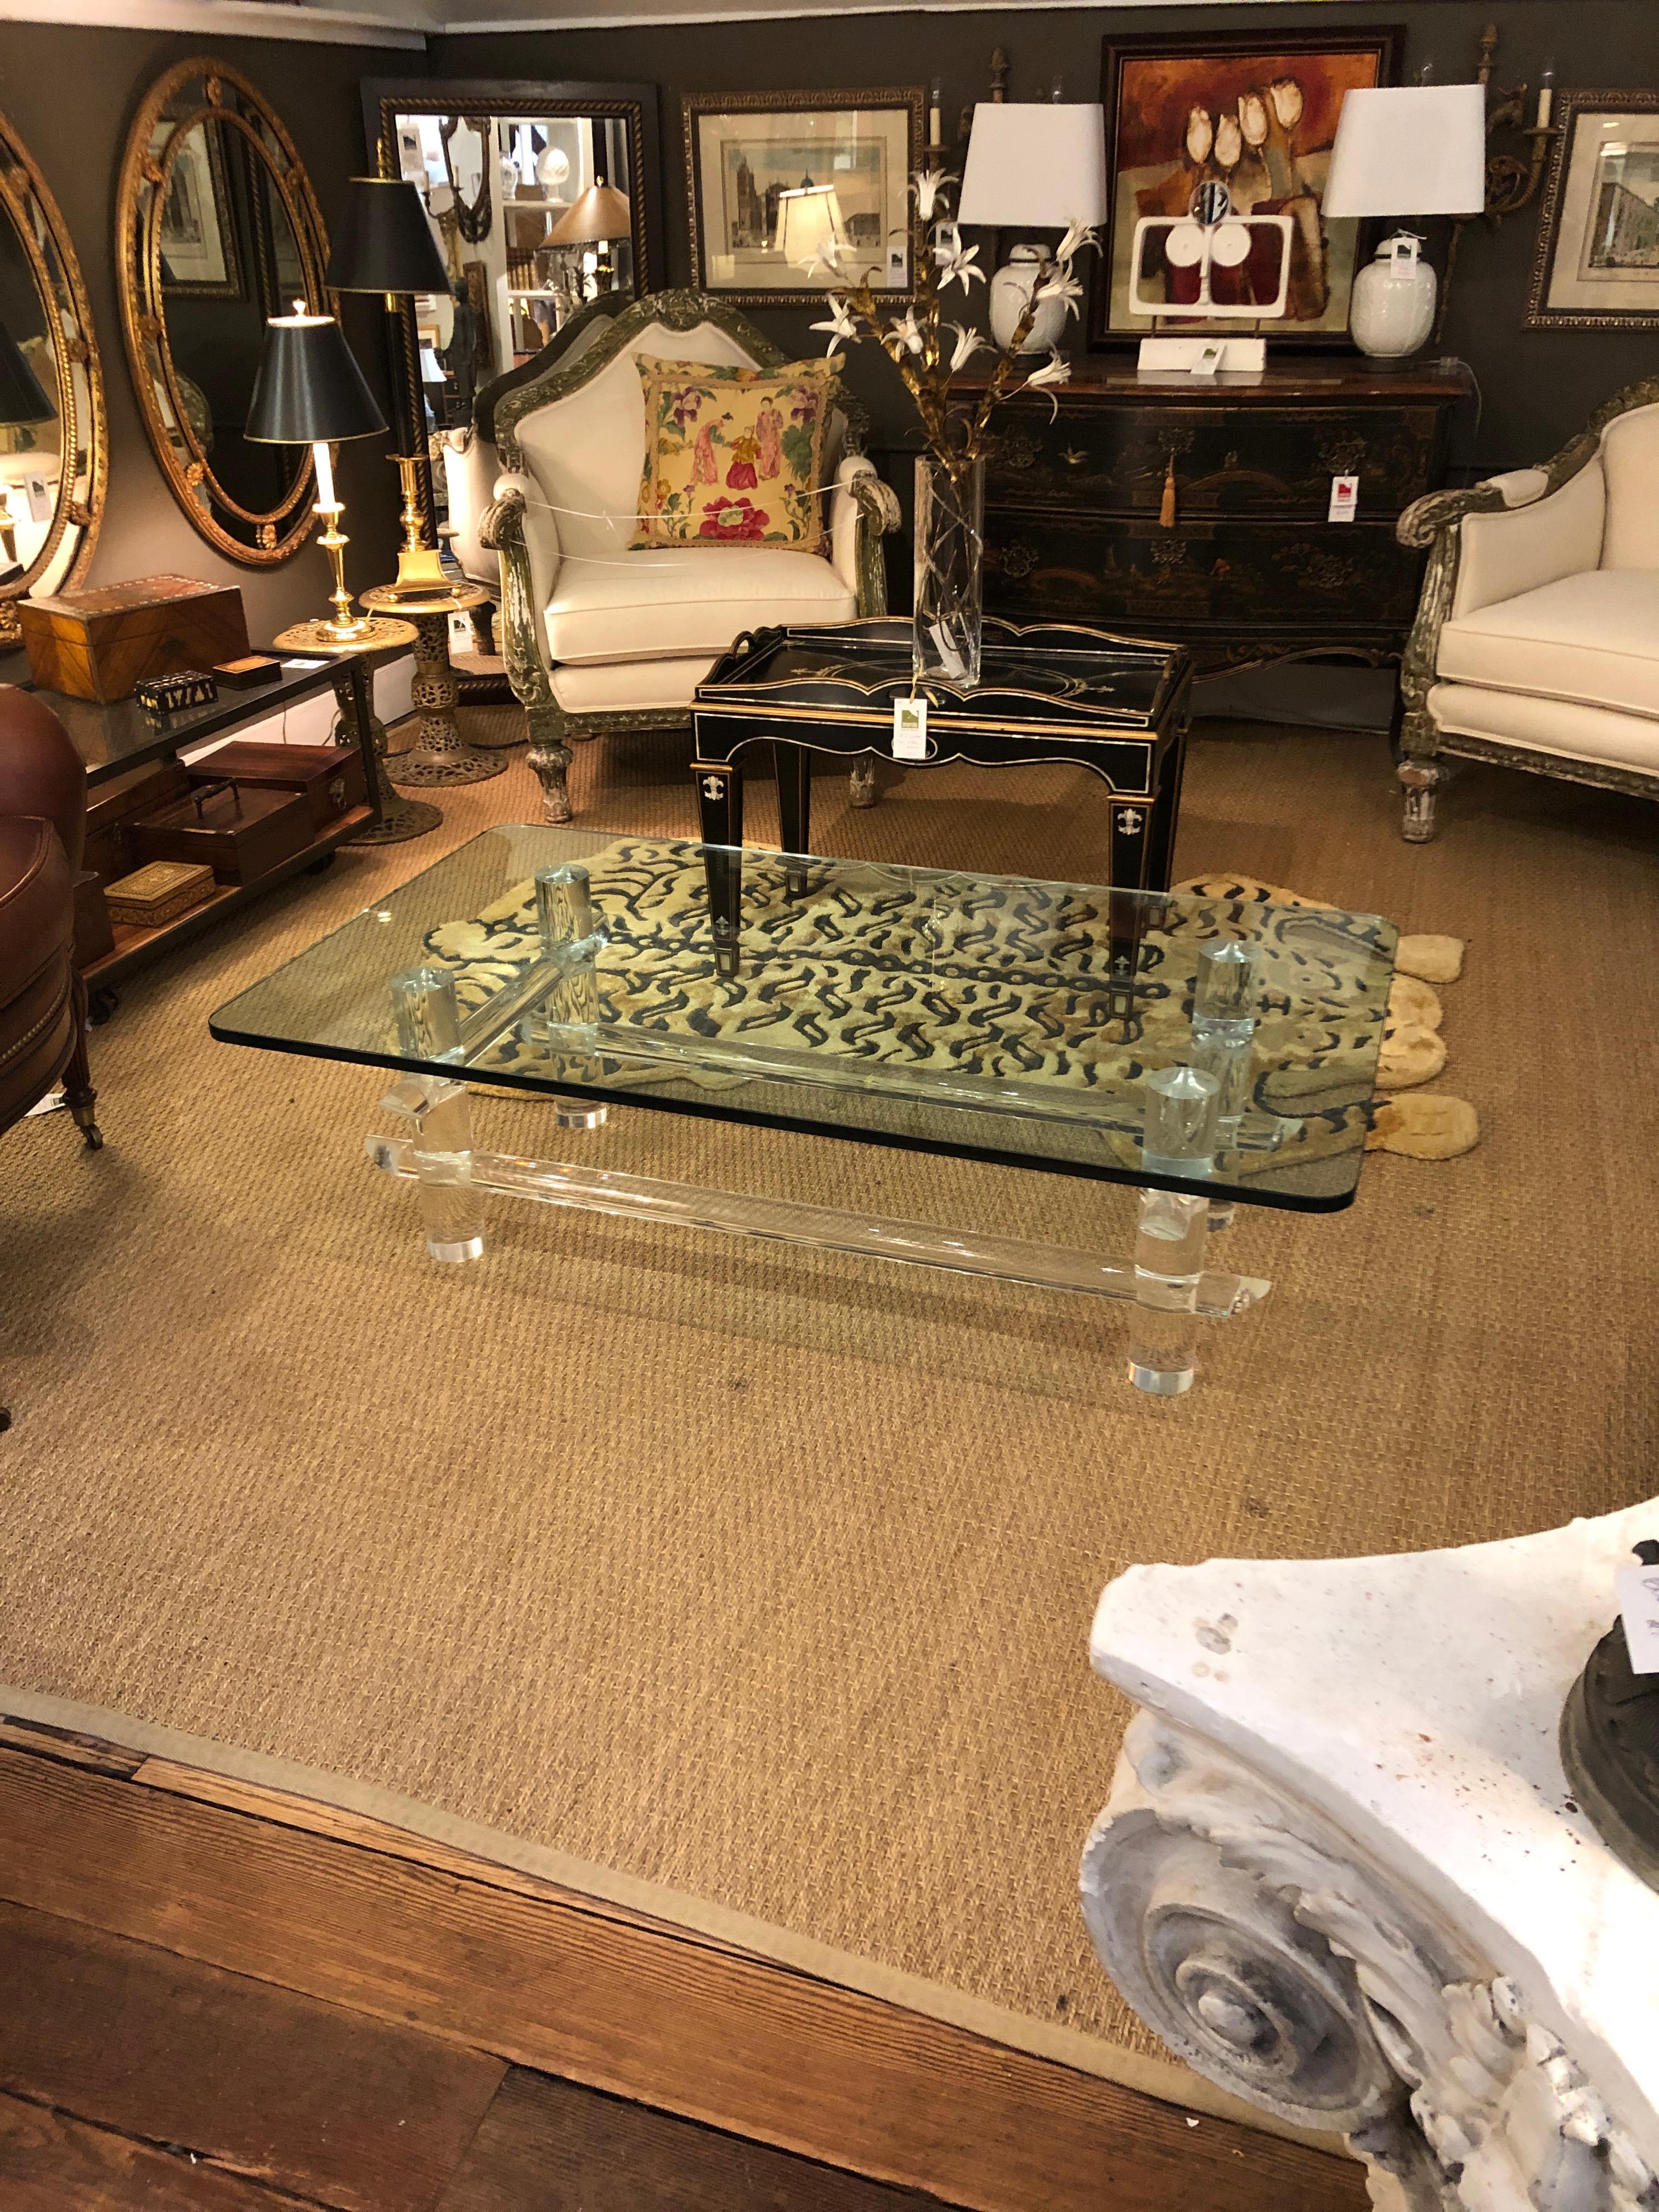 A rare form of a glitzy midcentury modern elegant Lucite and glass rectangular coffee table having chunky Lucite columnar shaped rods in a faux bamboo designed base and a super thick 3/4 inch glass top.